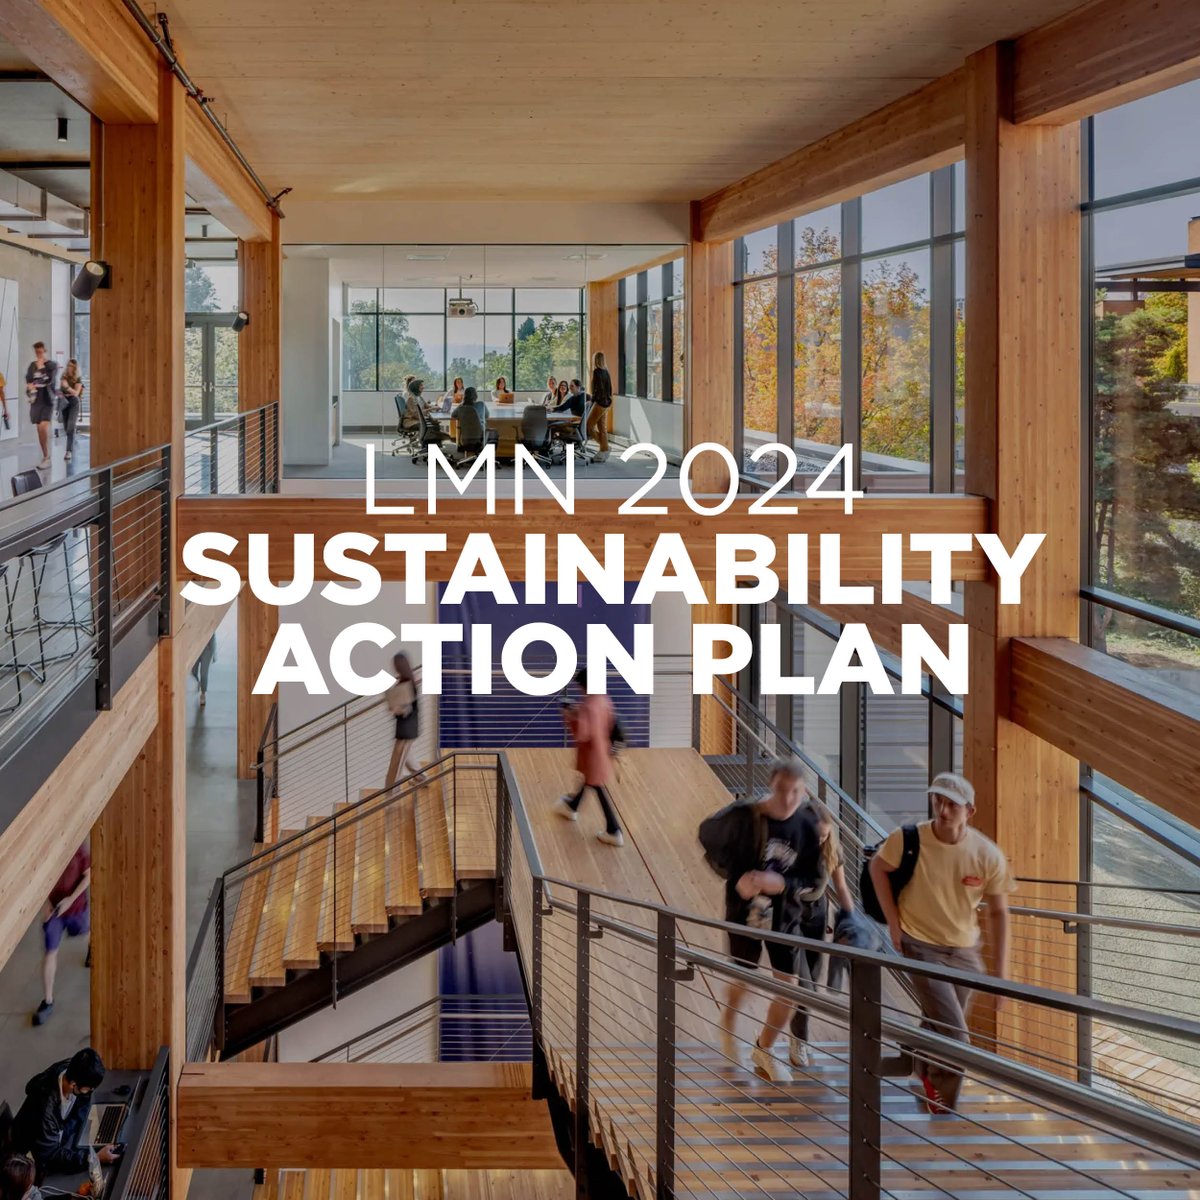 Continuing with the celebrations to commemorate #EarthDay24 we are pleased to share the LMN 2024 Sustainability Action Plan! To learn more, we invite everyone to visit our website: lmnarchitects.com/lmn-research/2…